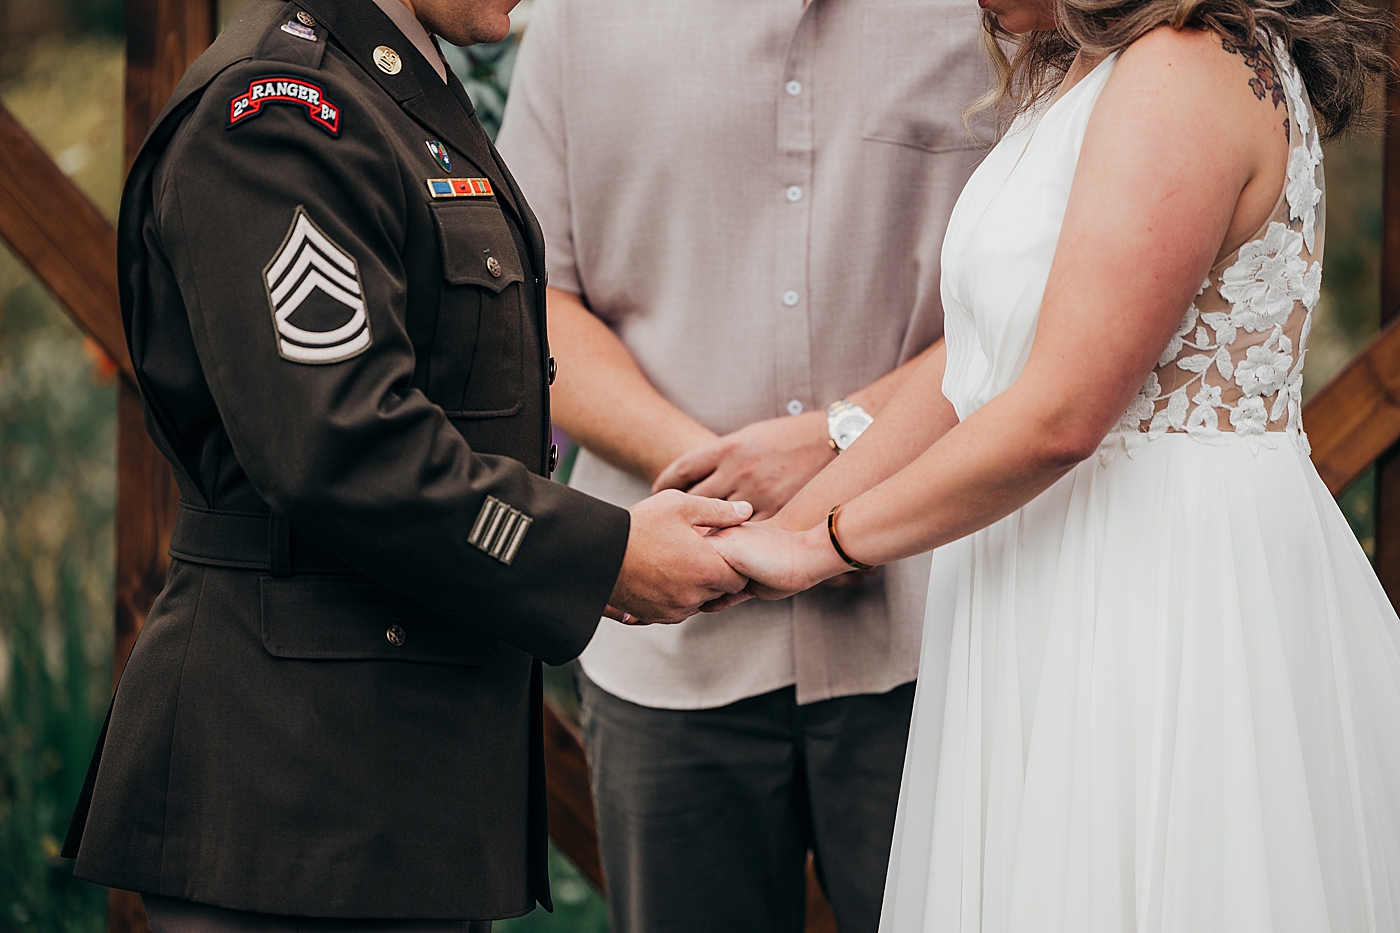 Couple holding hands during elopement ceremony. Photo by Megan Montalvo Photography.